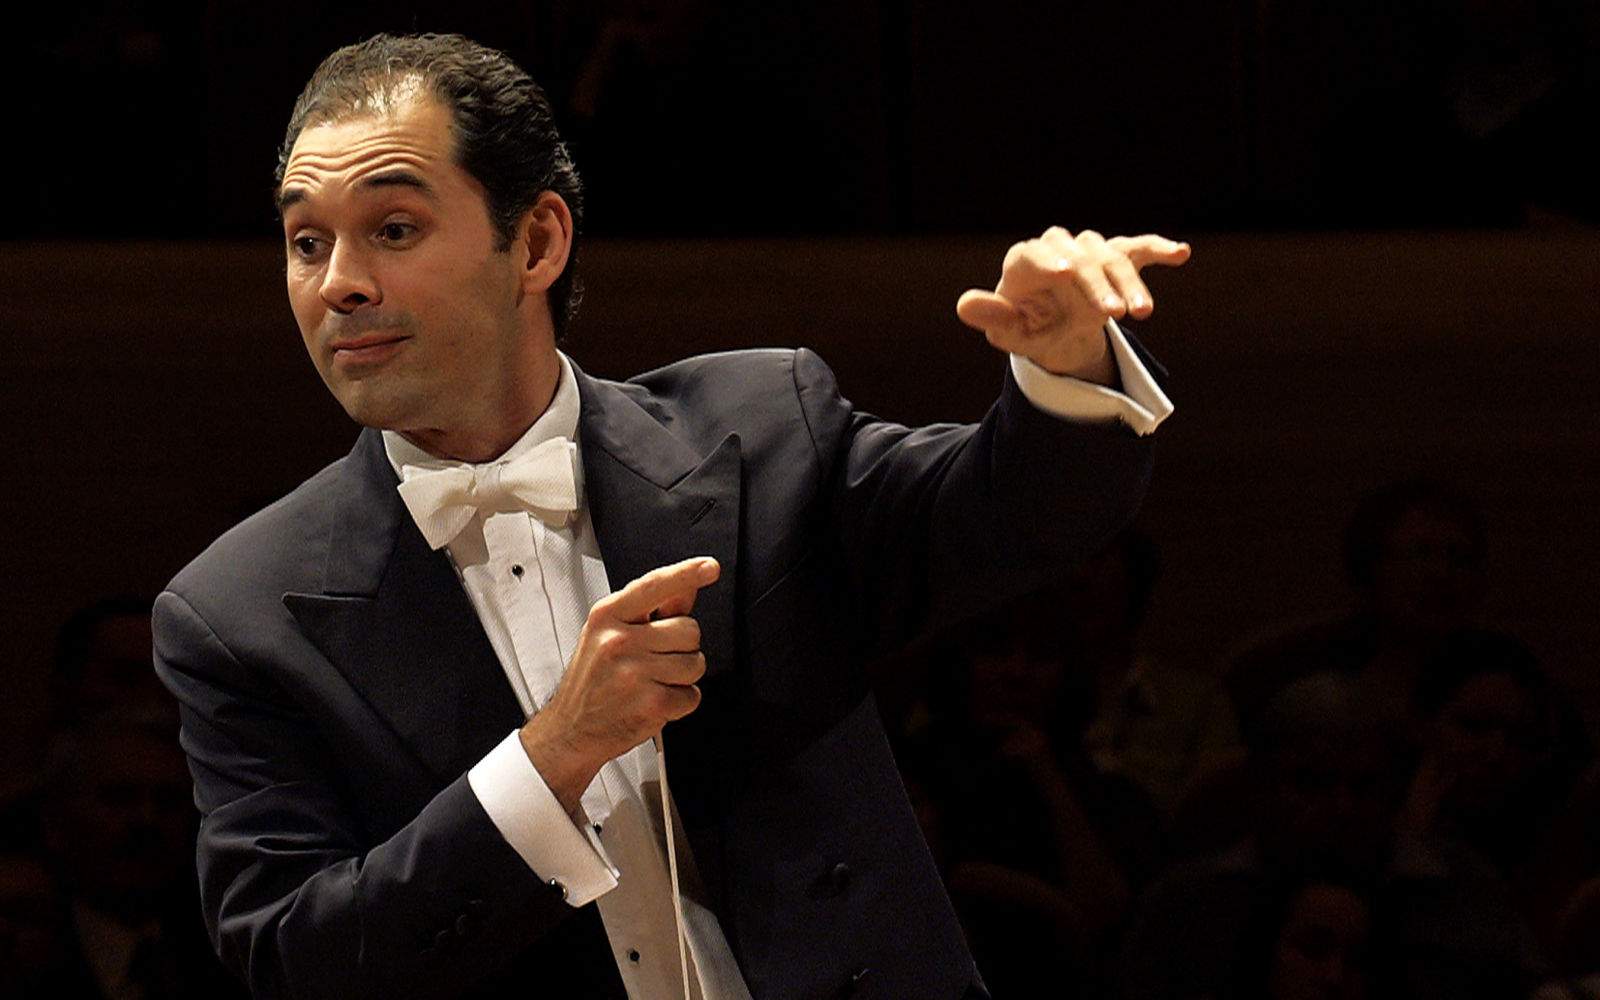 Moscow, Bolshoi director resigns. We musicians are ambassadors of peace